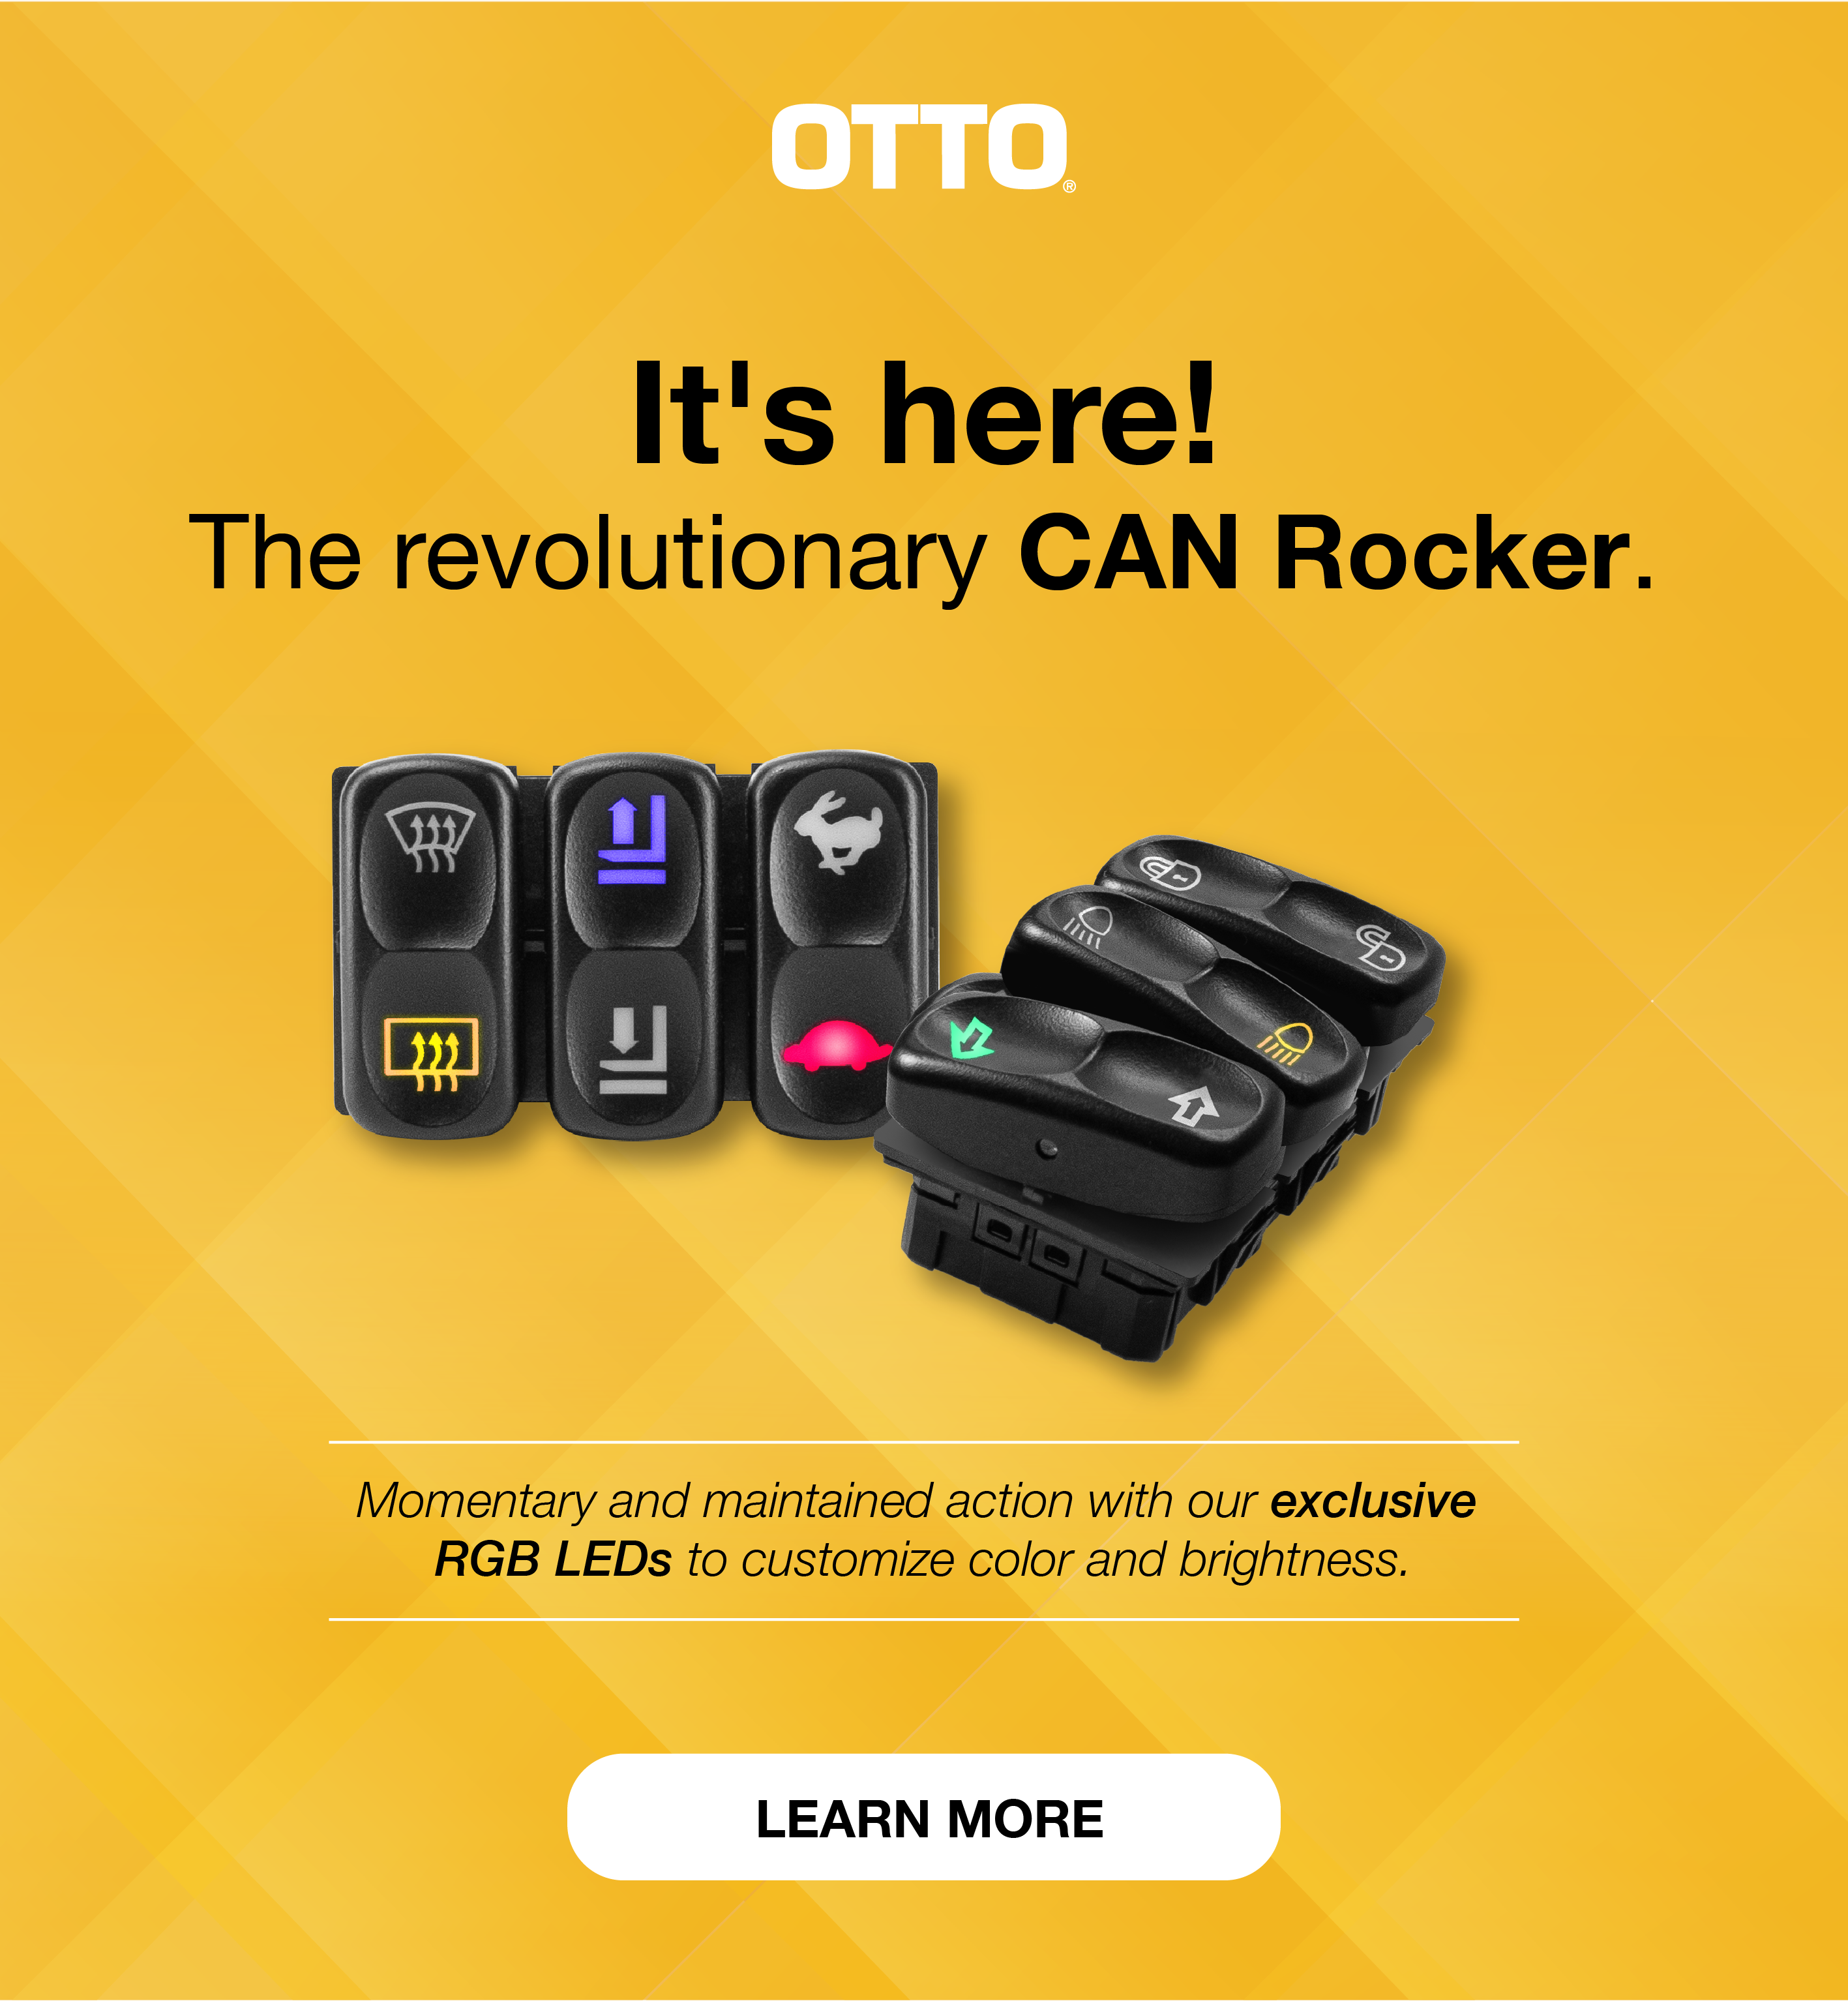 Click to Learn More about the new OTTO CAN Rocker